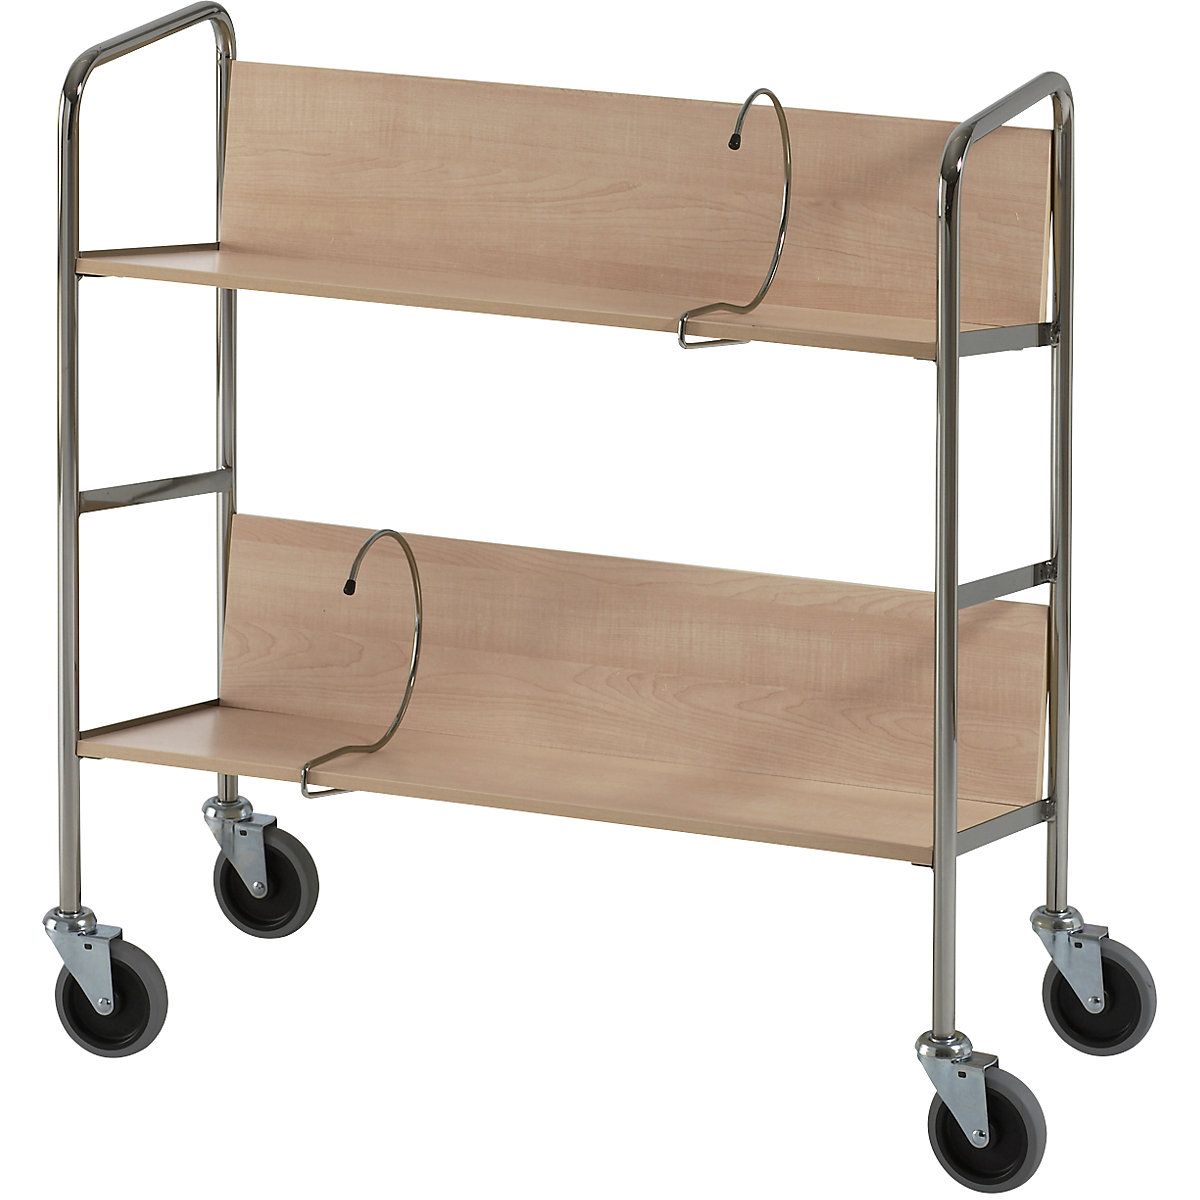 File trolley, chrome plated – HelgeNyberg, 2 shelves, LxWxH 800 x 340 x 840 mm, beech finish, 5+ items-4